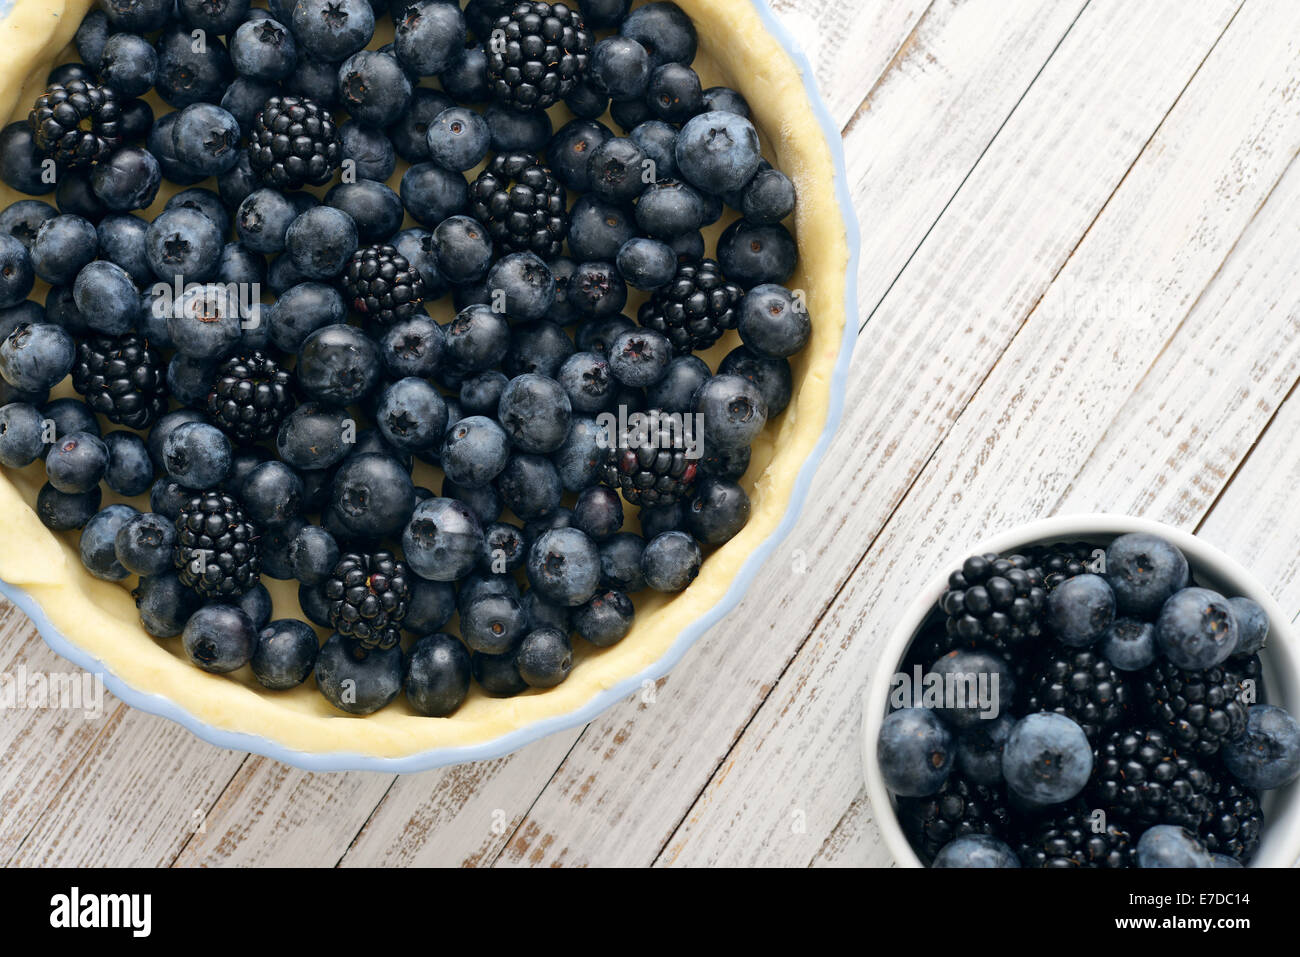 Tasty homemade pie with blueberries and blackberries on wooden table. Top view. Stock Photo